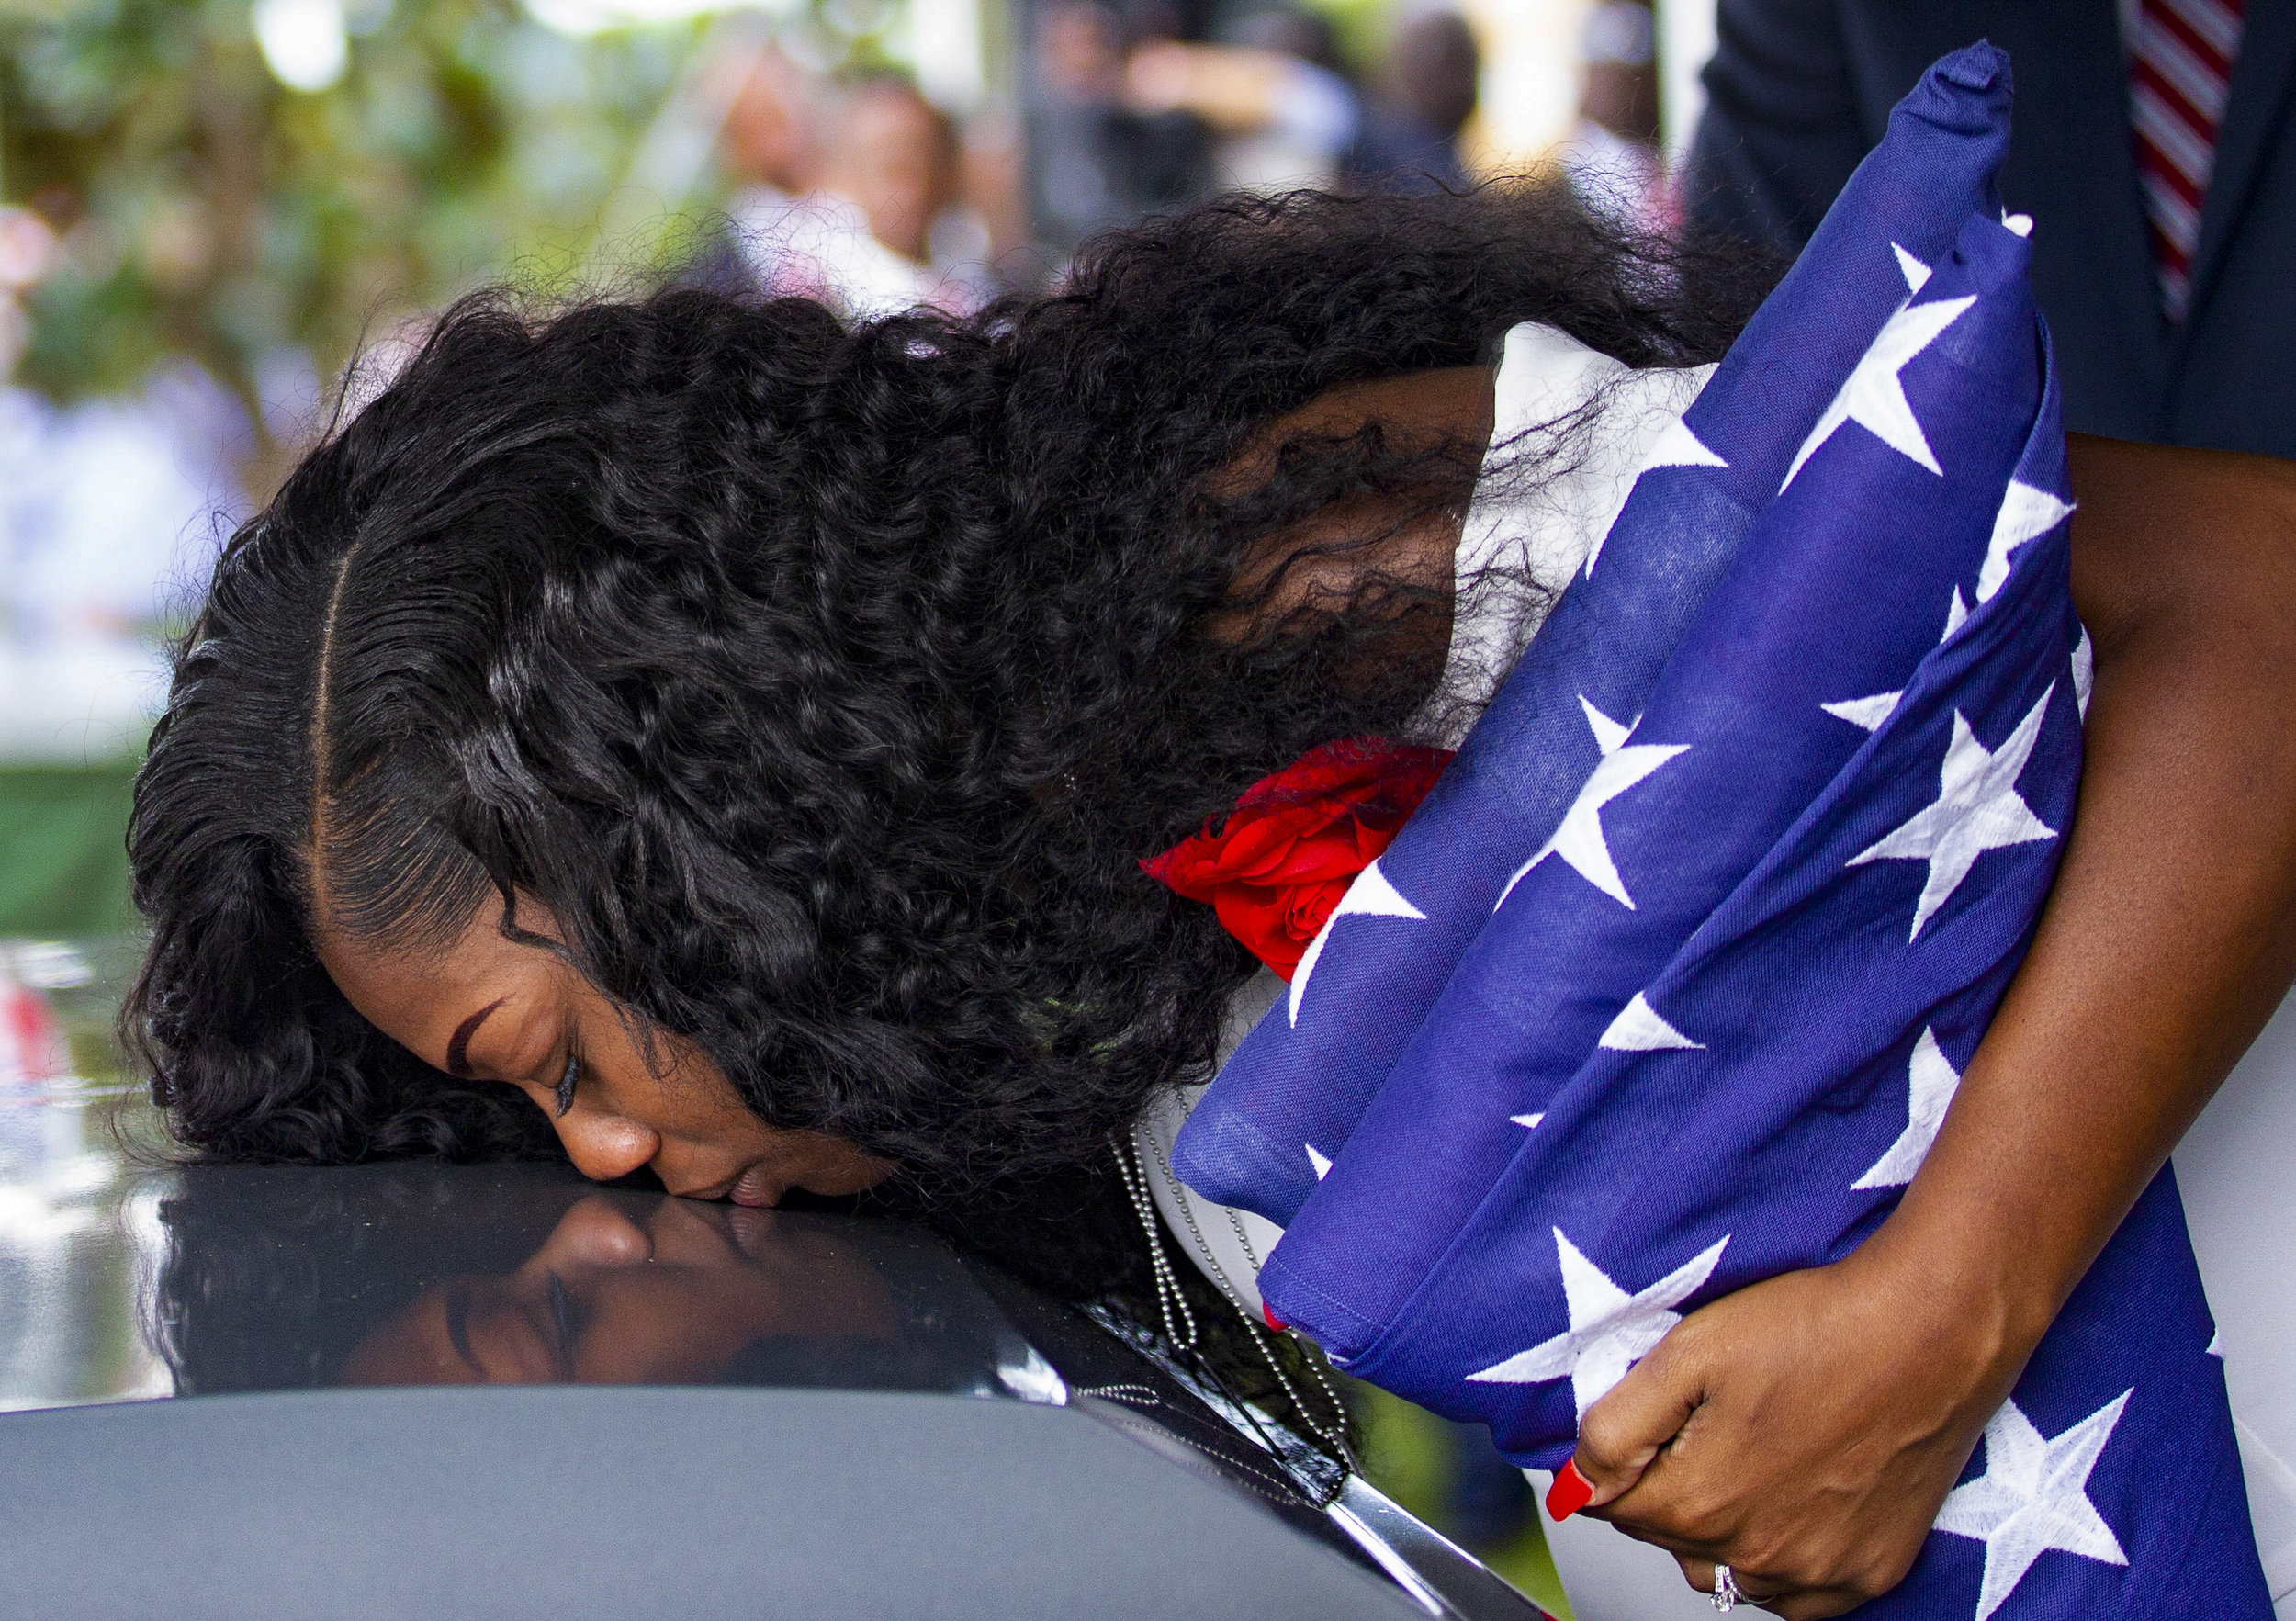  Myeshia Johnson kisses the casket of her husband, Sgt. La David Johnson, during his burial service at Fred Hunter's Hollywood Memorial Gardens in Hollywood, Florida on Saturday, October 21, 2017. 